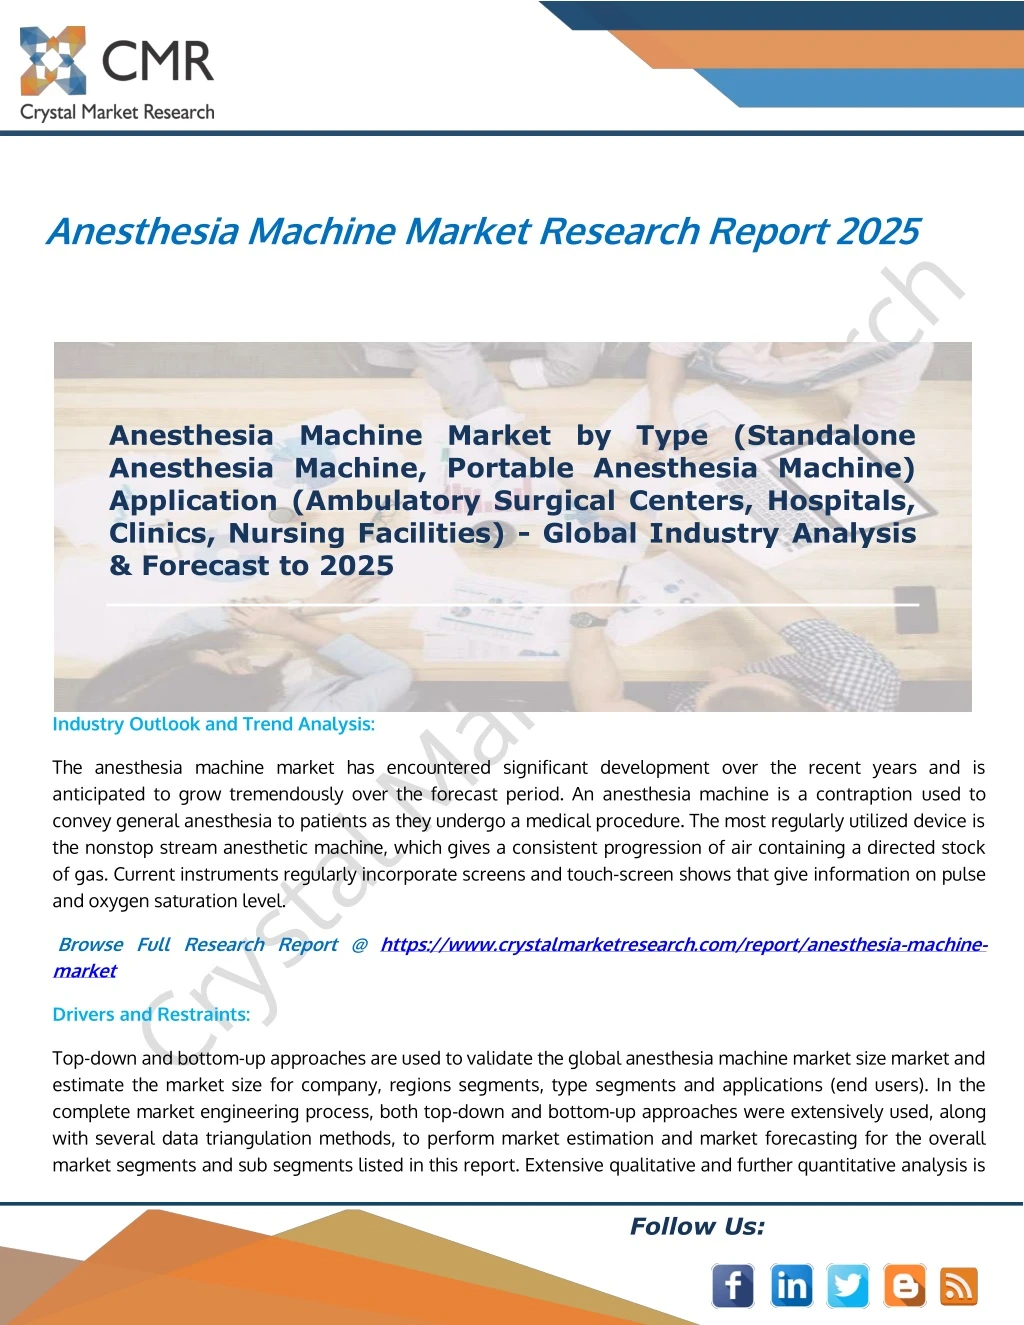 anesthesia machine market research report 2025